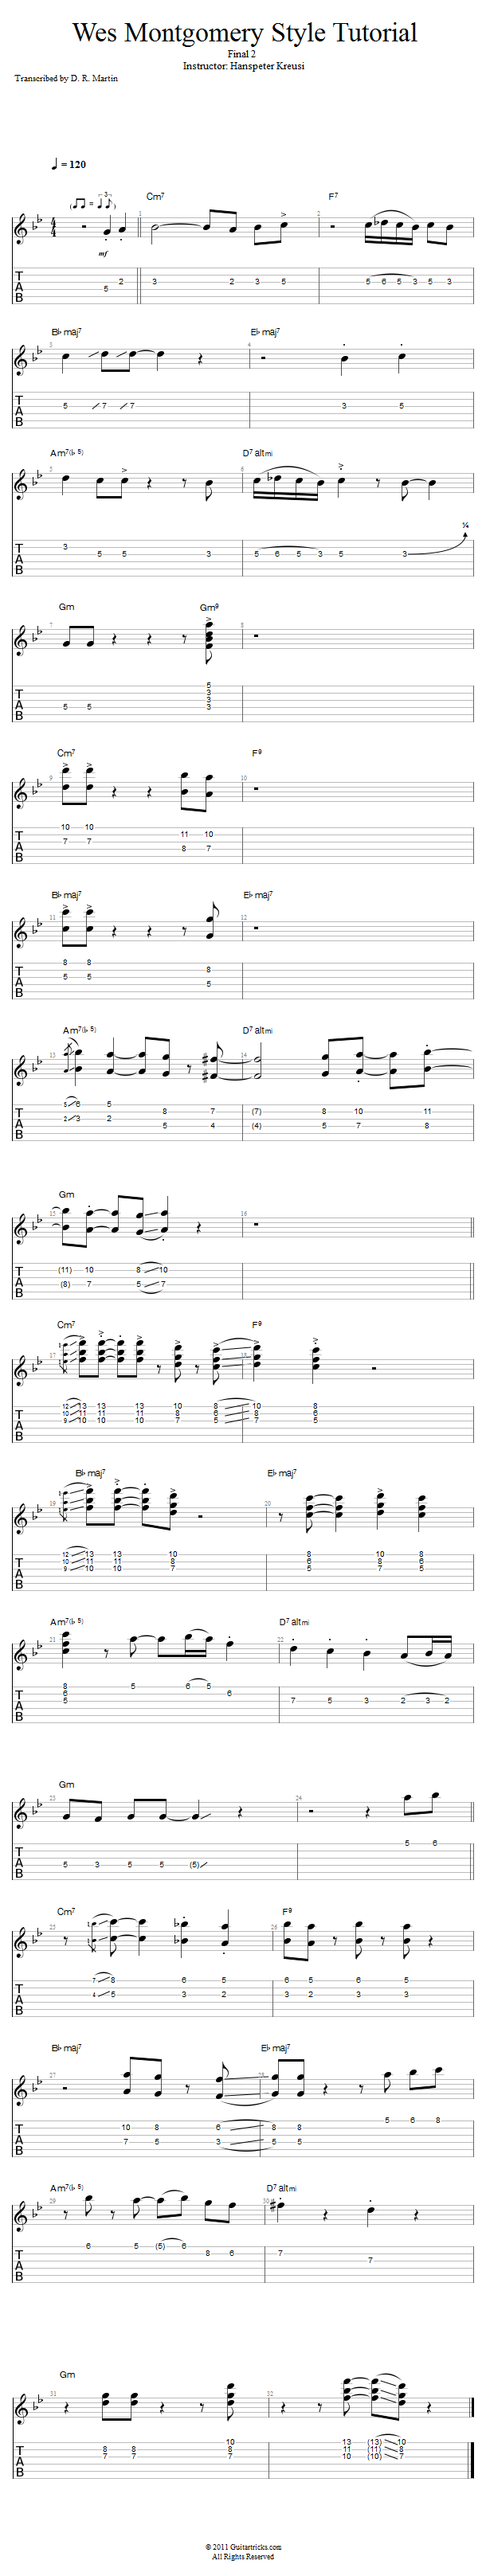 Wes Montgomery Style: Final 2 song notation